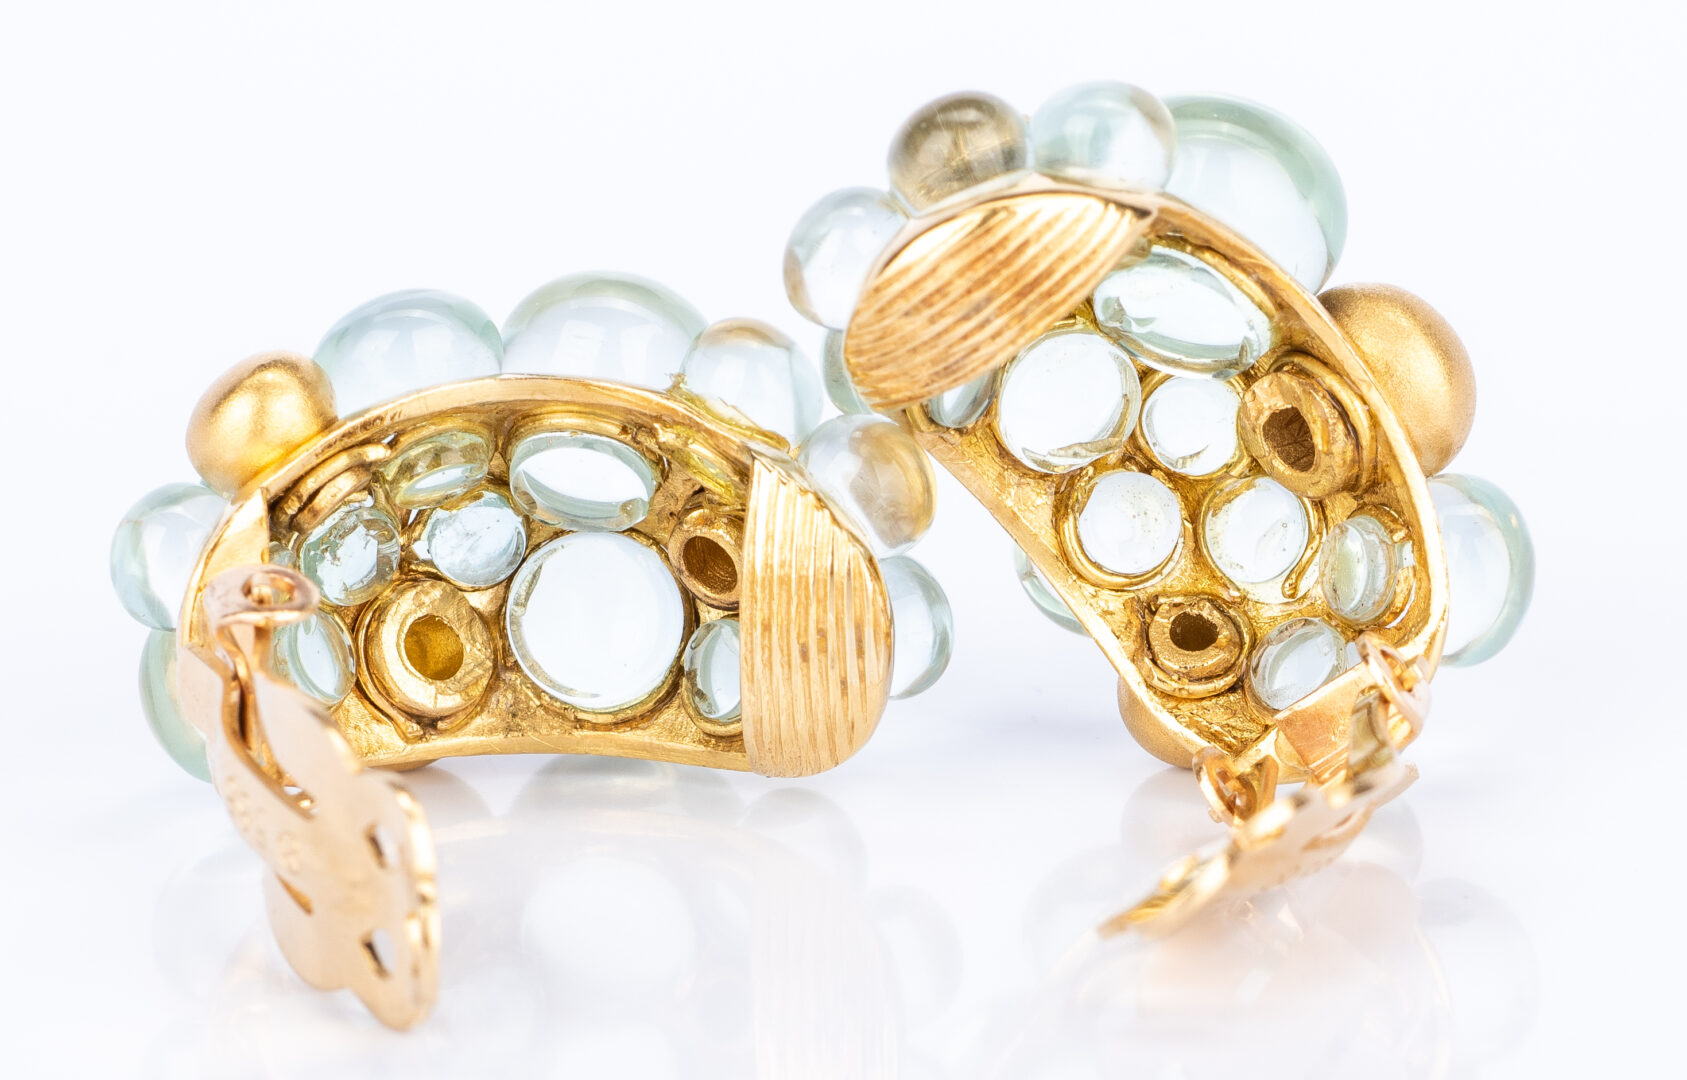 Lot 773: Bead Gold Ball Hoop Earrings with Cabochon Moonstone Beads